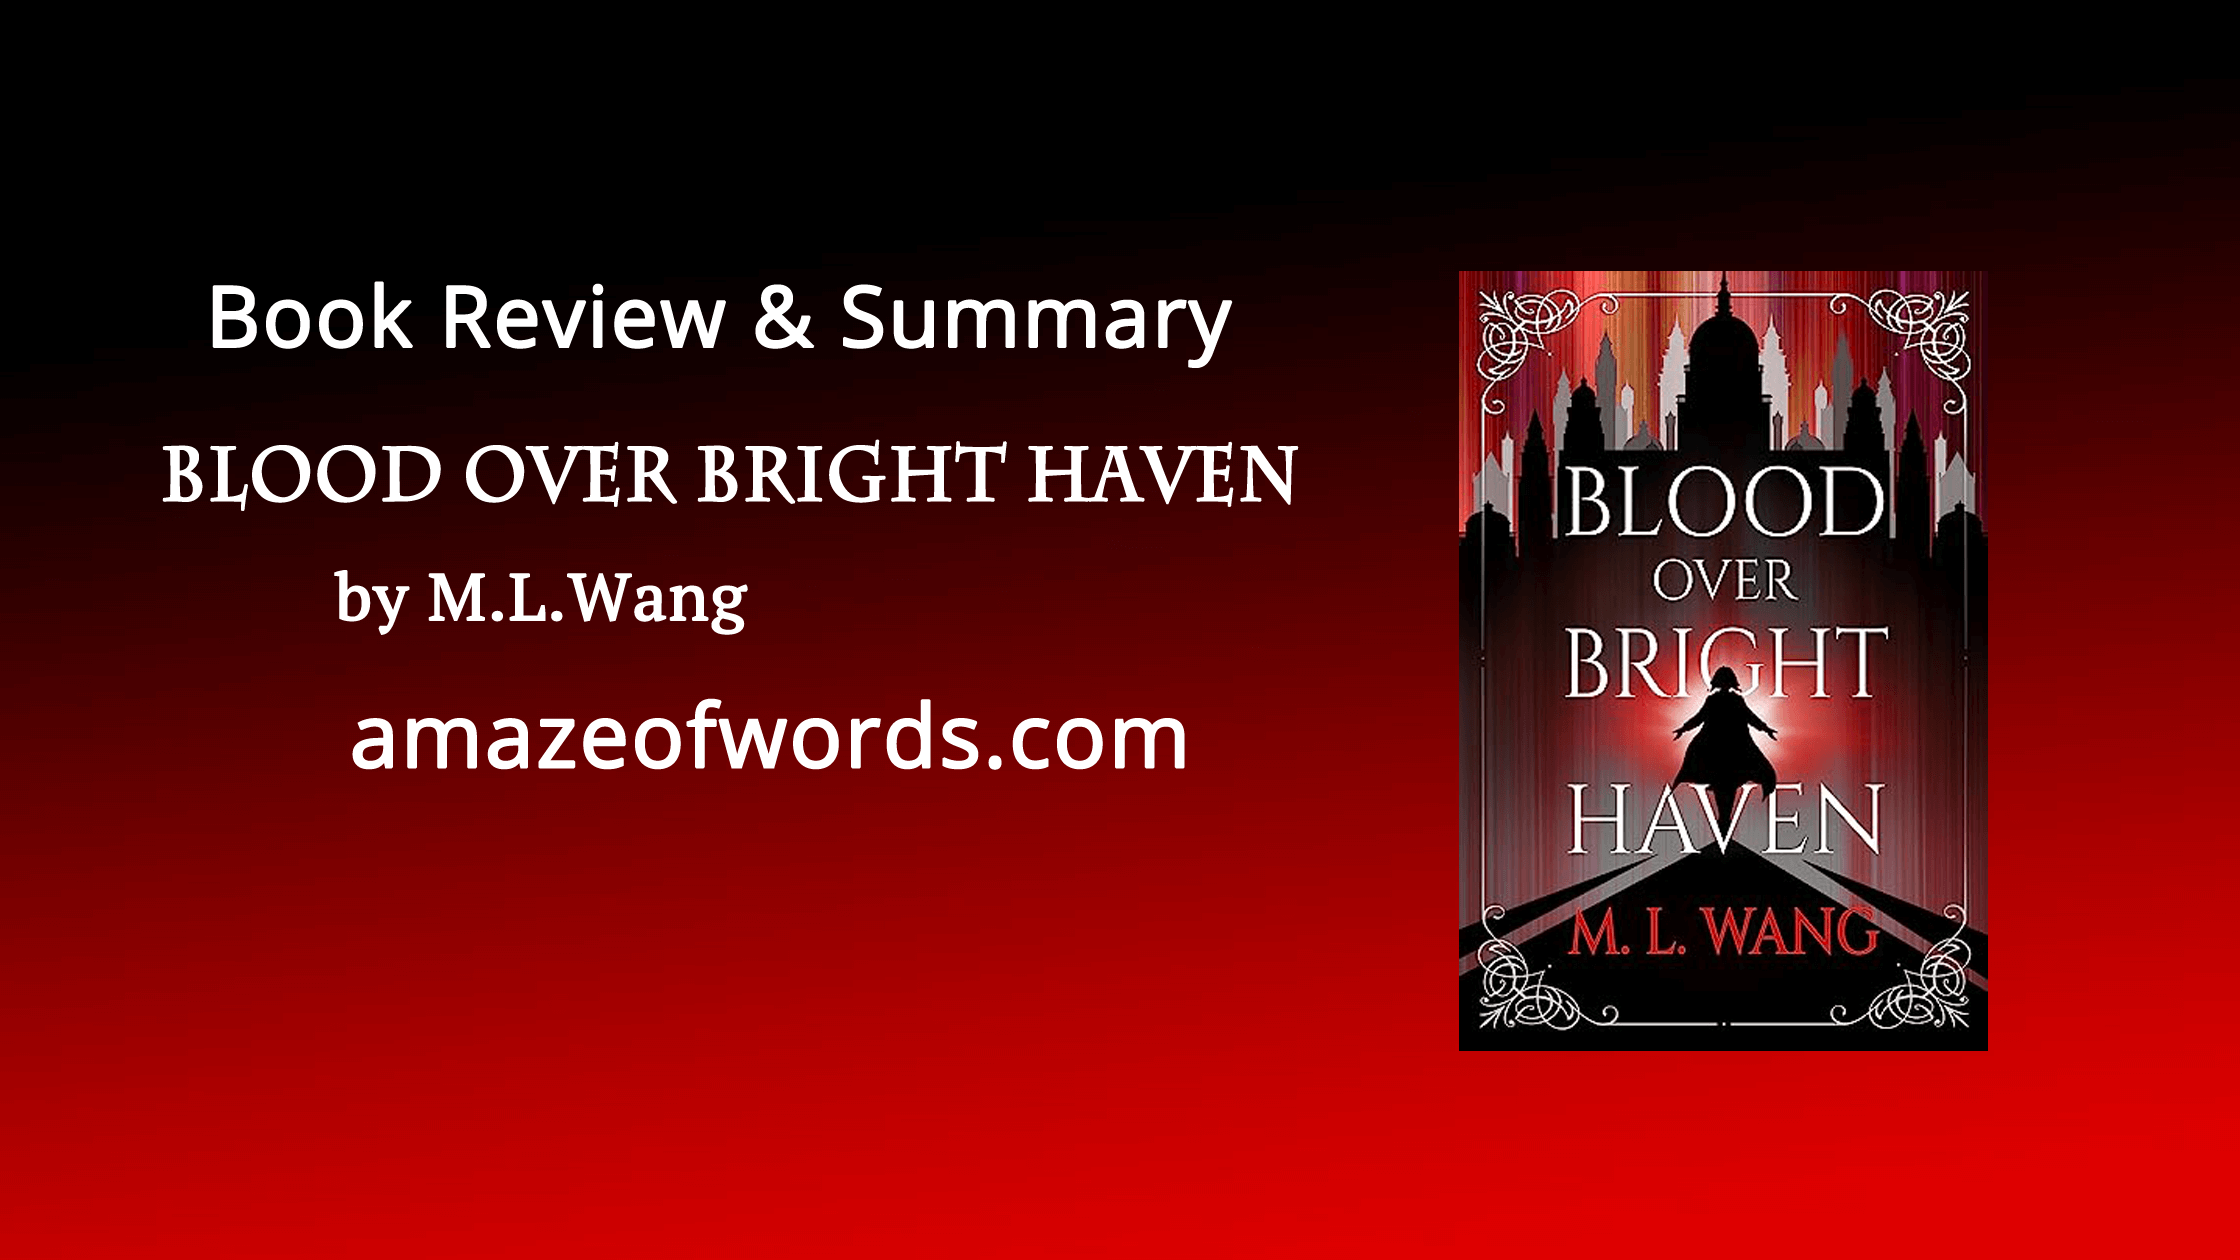 Blood Over Bright Haven by M.L.Wang — Book Review & Summary